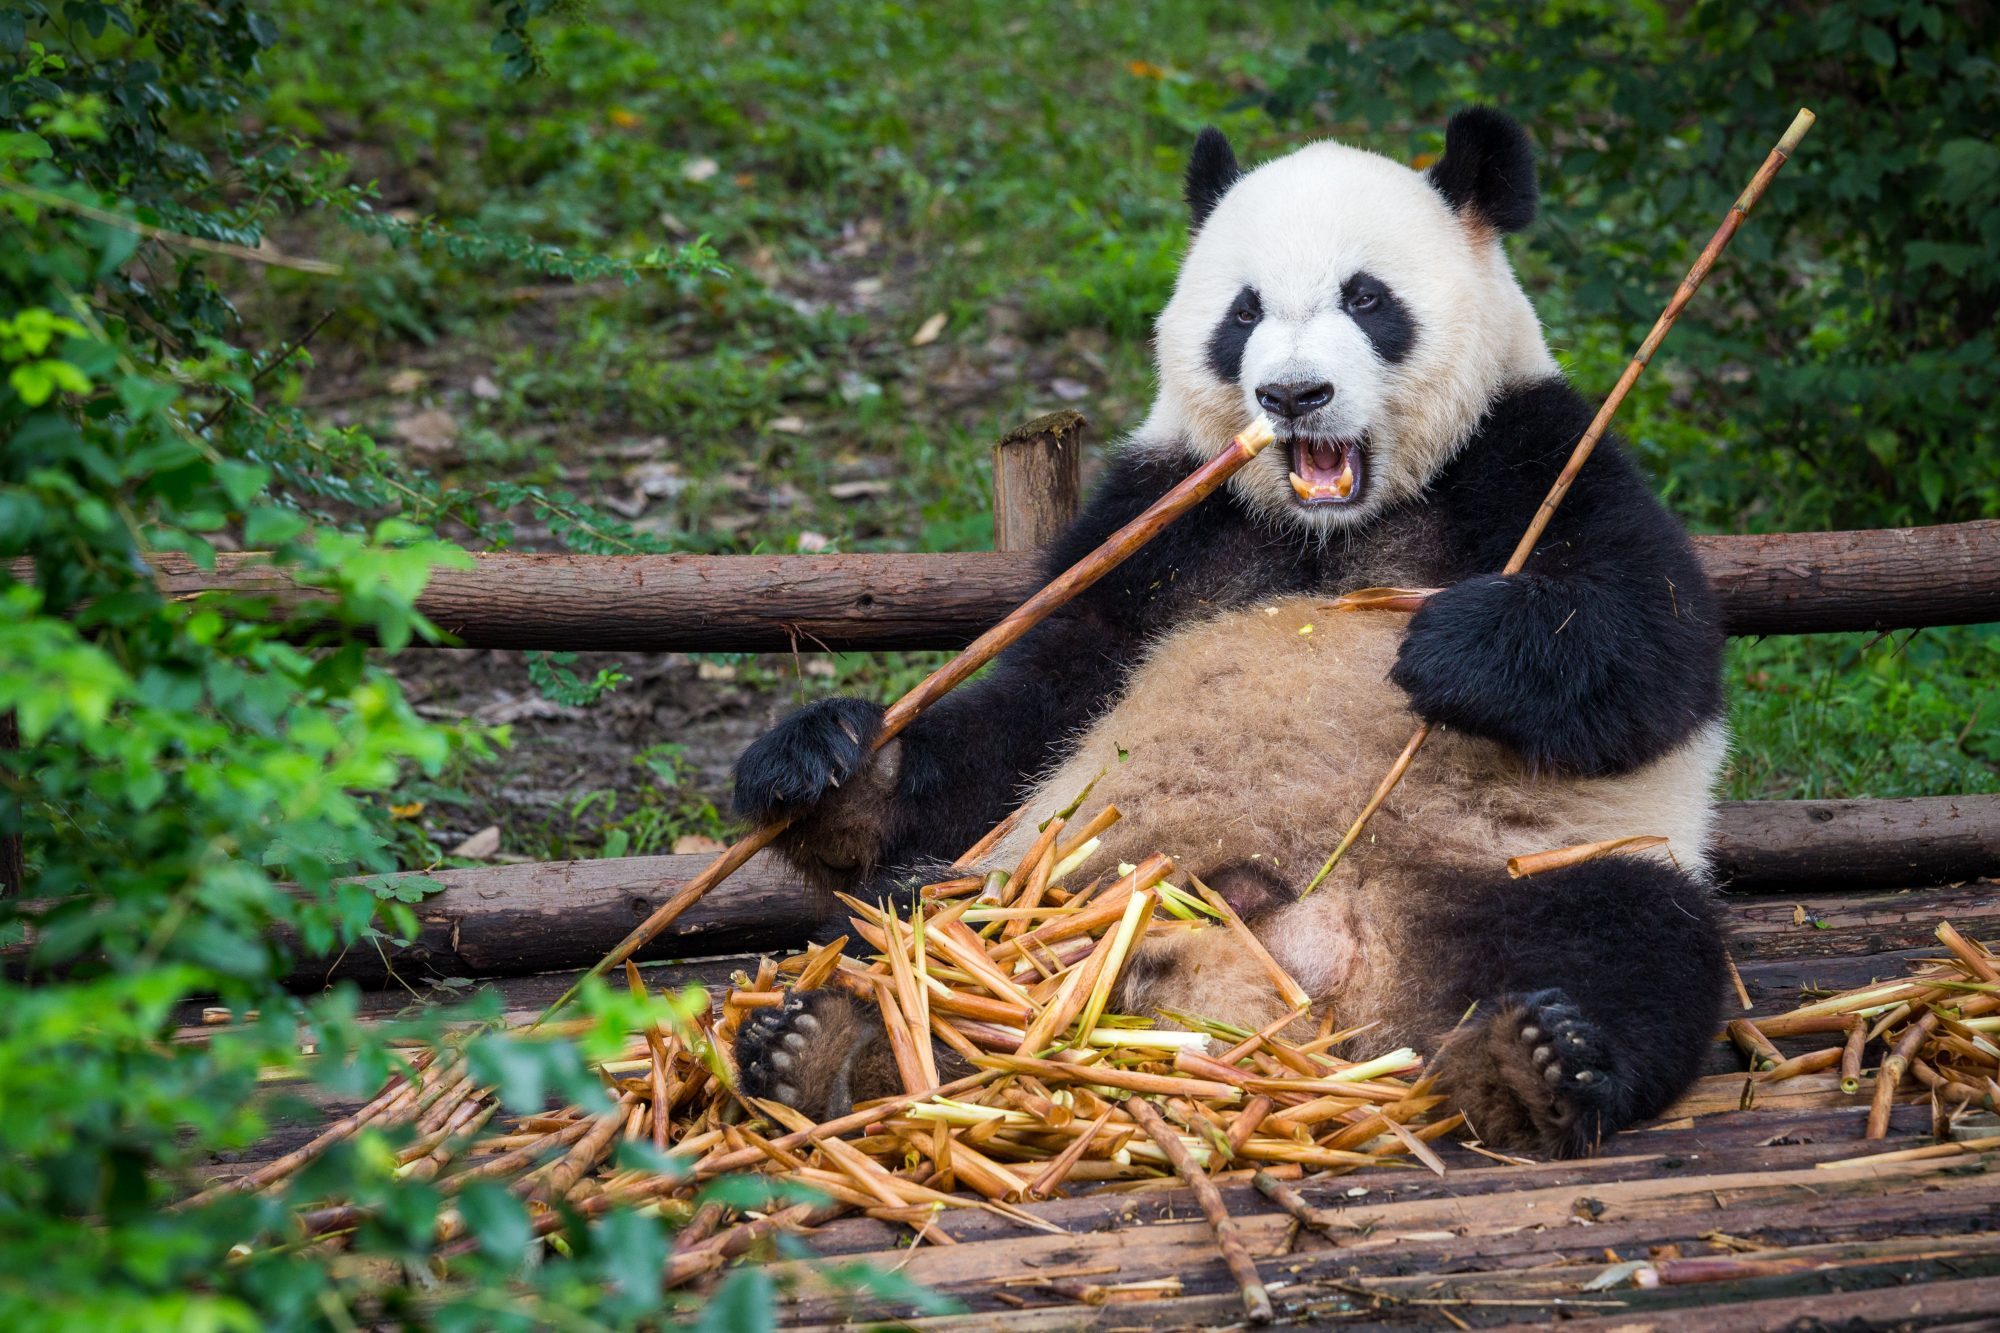 China has announced plans for a huge giant panda reserve